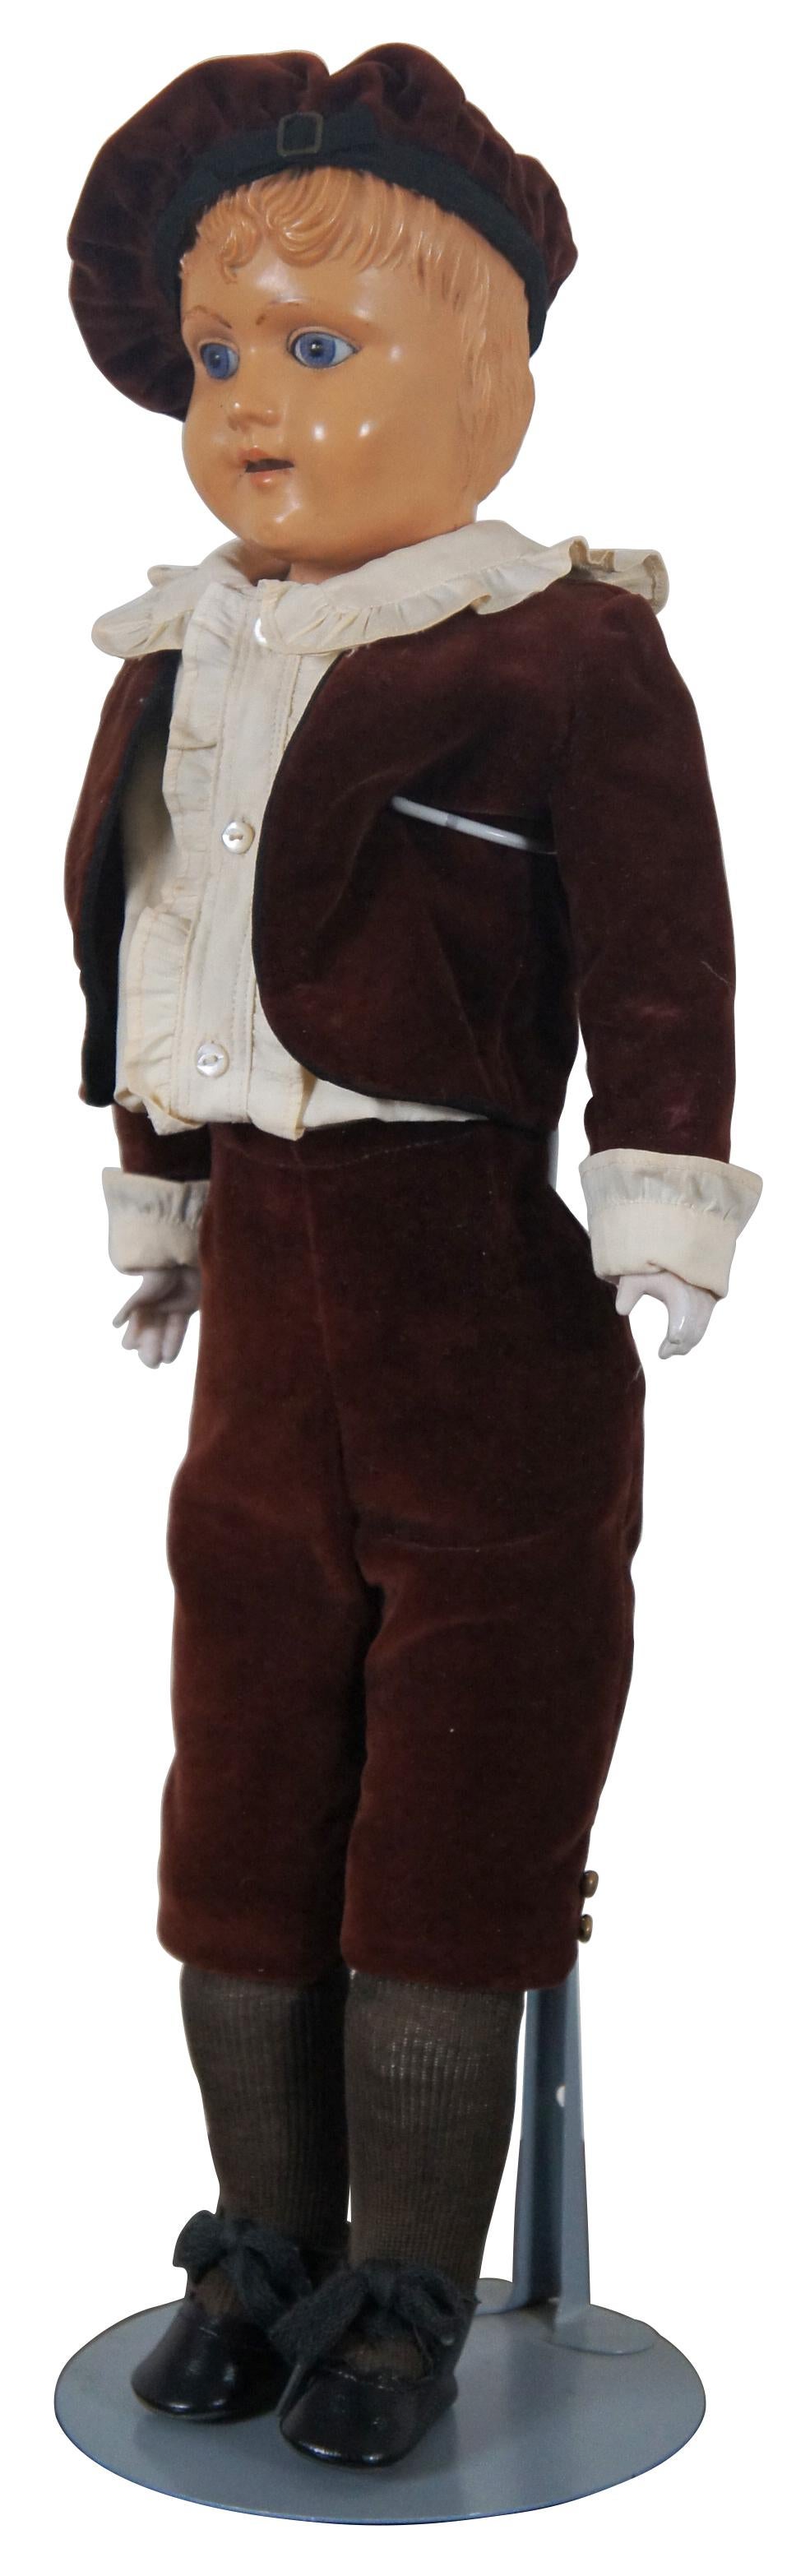 Circa 1903 antique doll by Schutz-Marke Germany with celluloid head and jointed leather body, composite hands and dressed in a burgundy leather suit and Scotch bonnet. “In 1889, a German company had found a way to improve celluloid so it could be